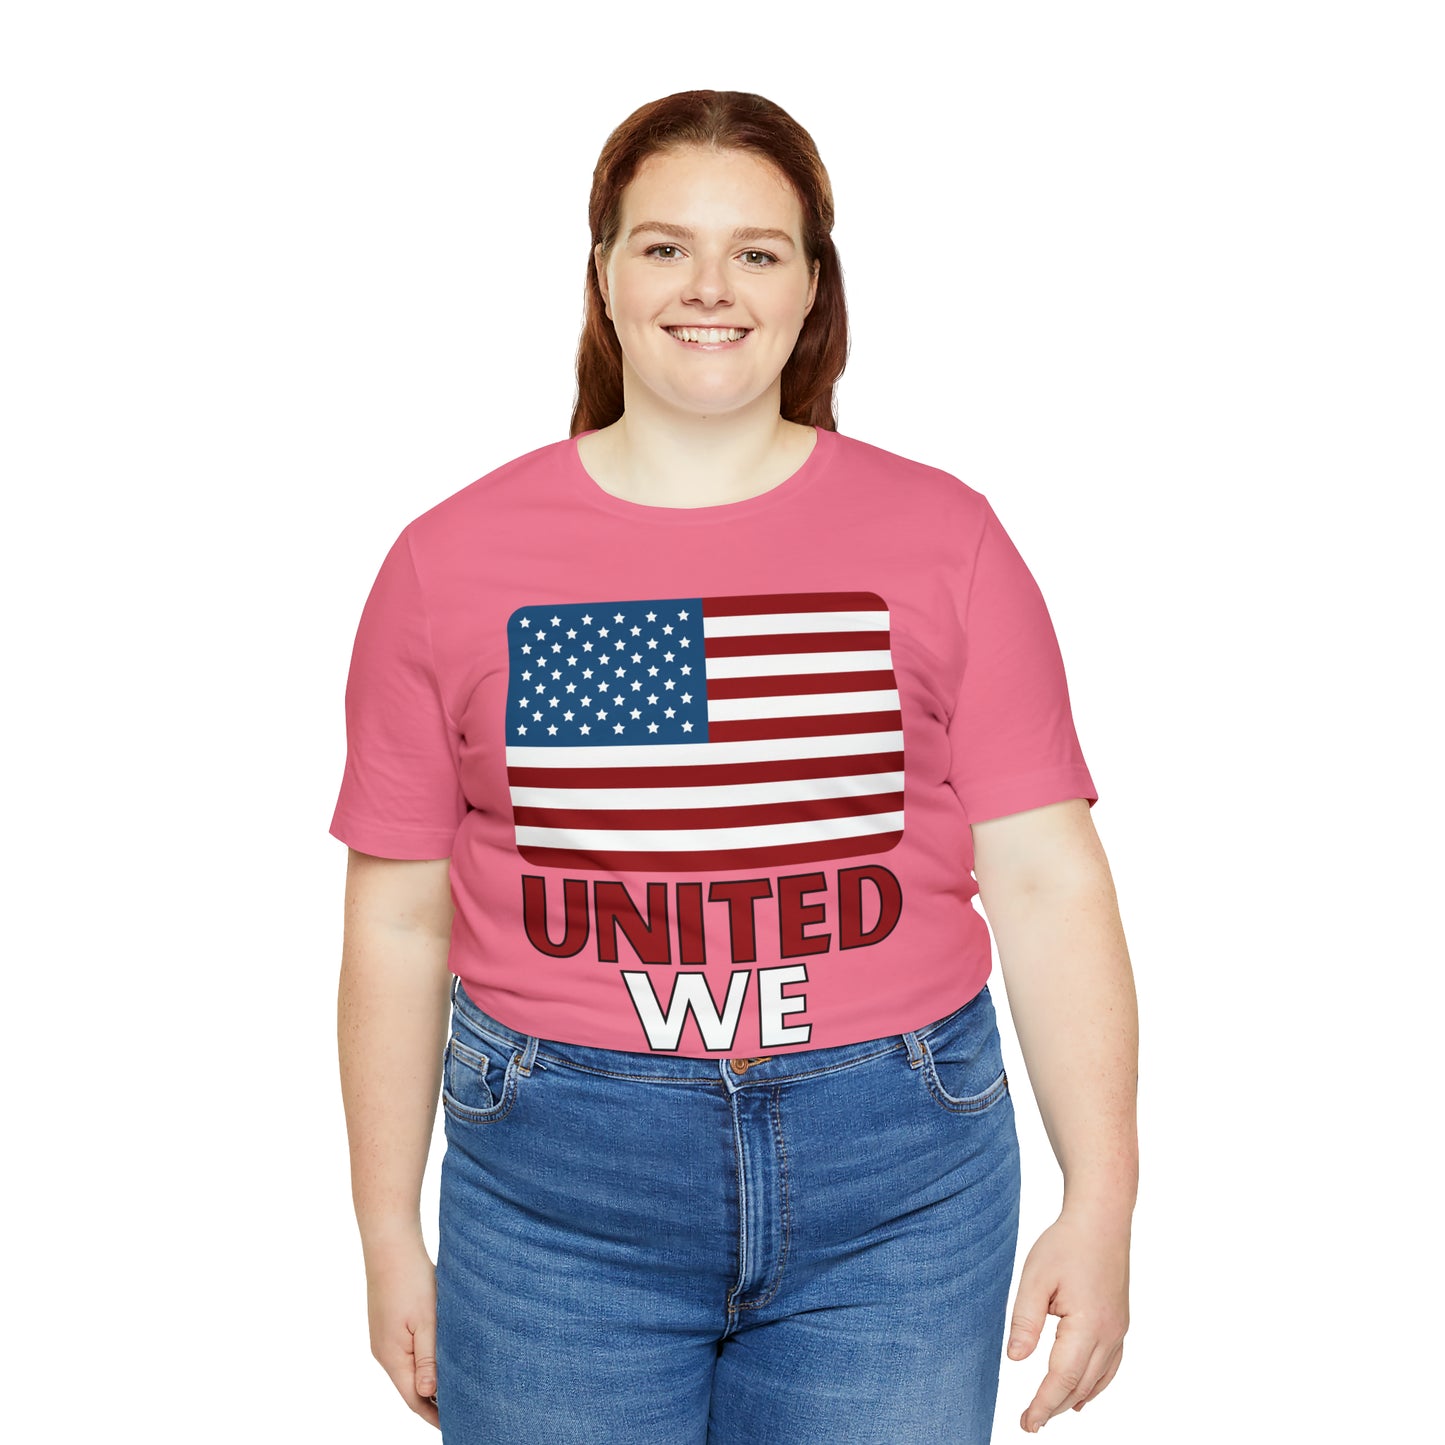 USA Flag shirt, 4th of July shirt, Independence Day shirt, United We Stand